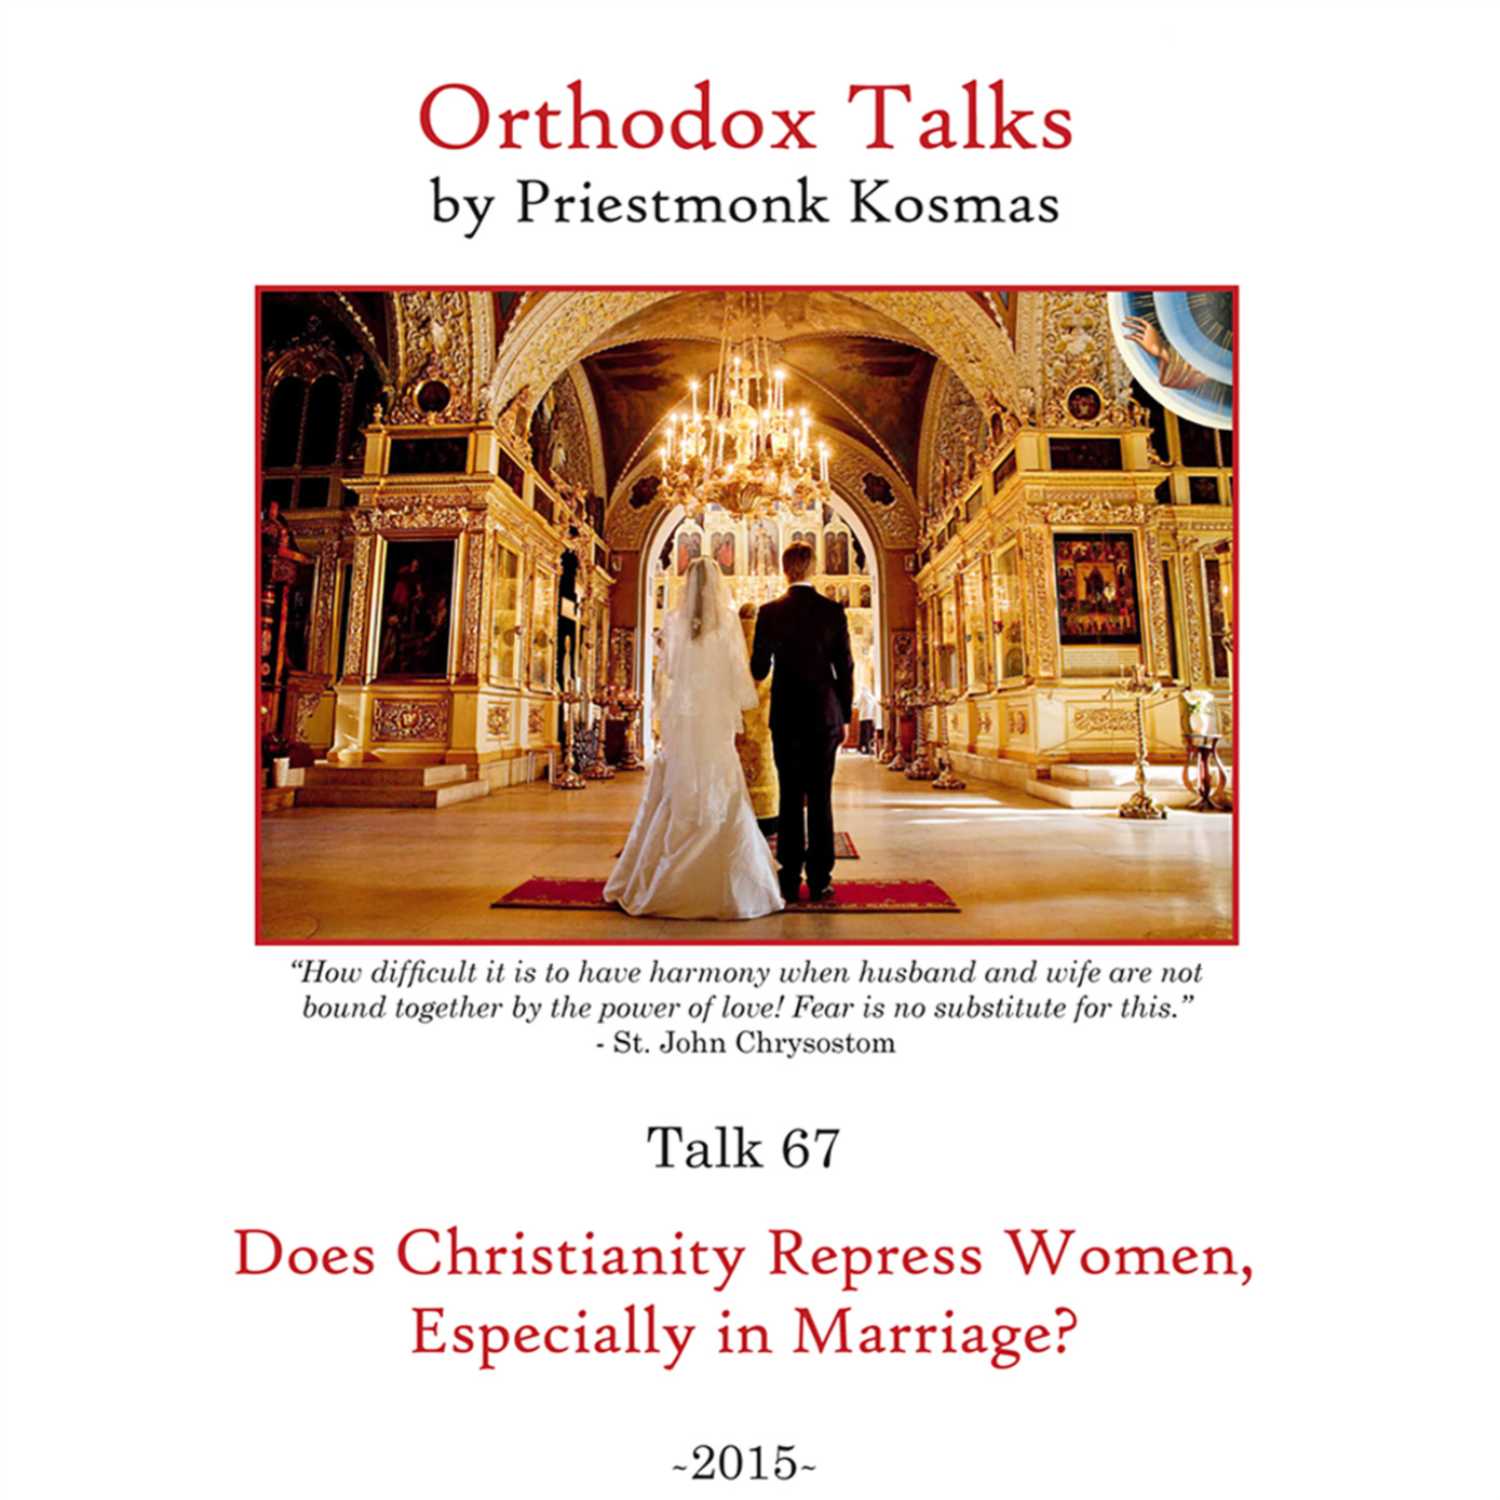 Talk 67: Does Christianity Repress Women, Especially in Marriage?